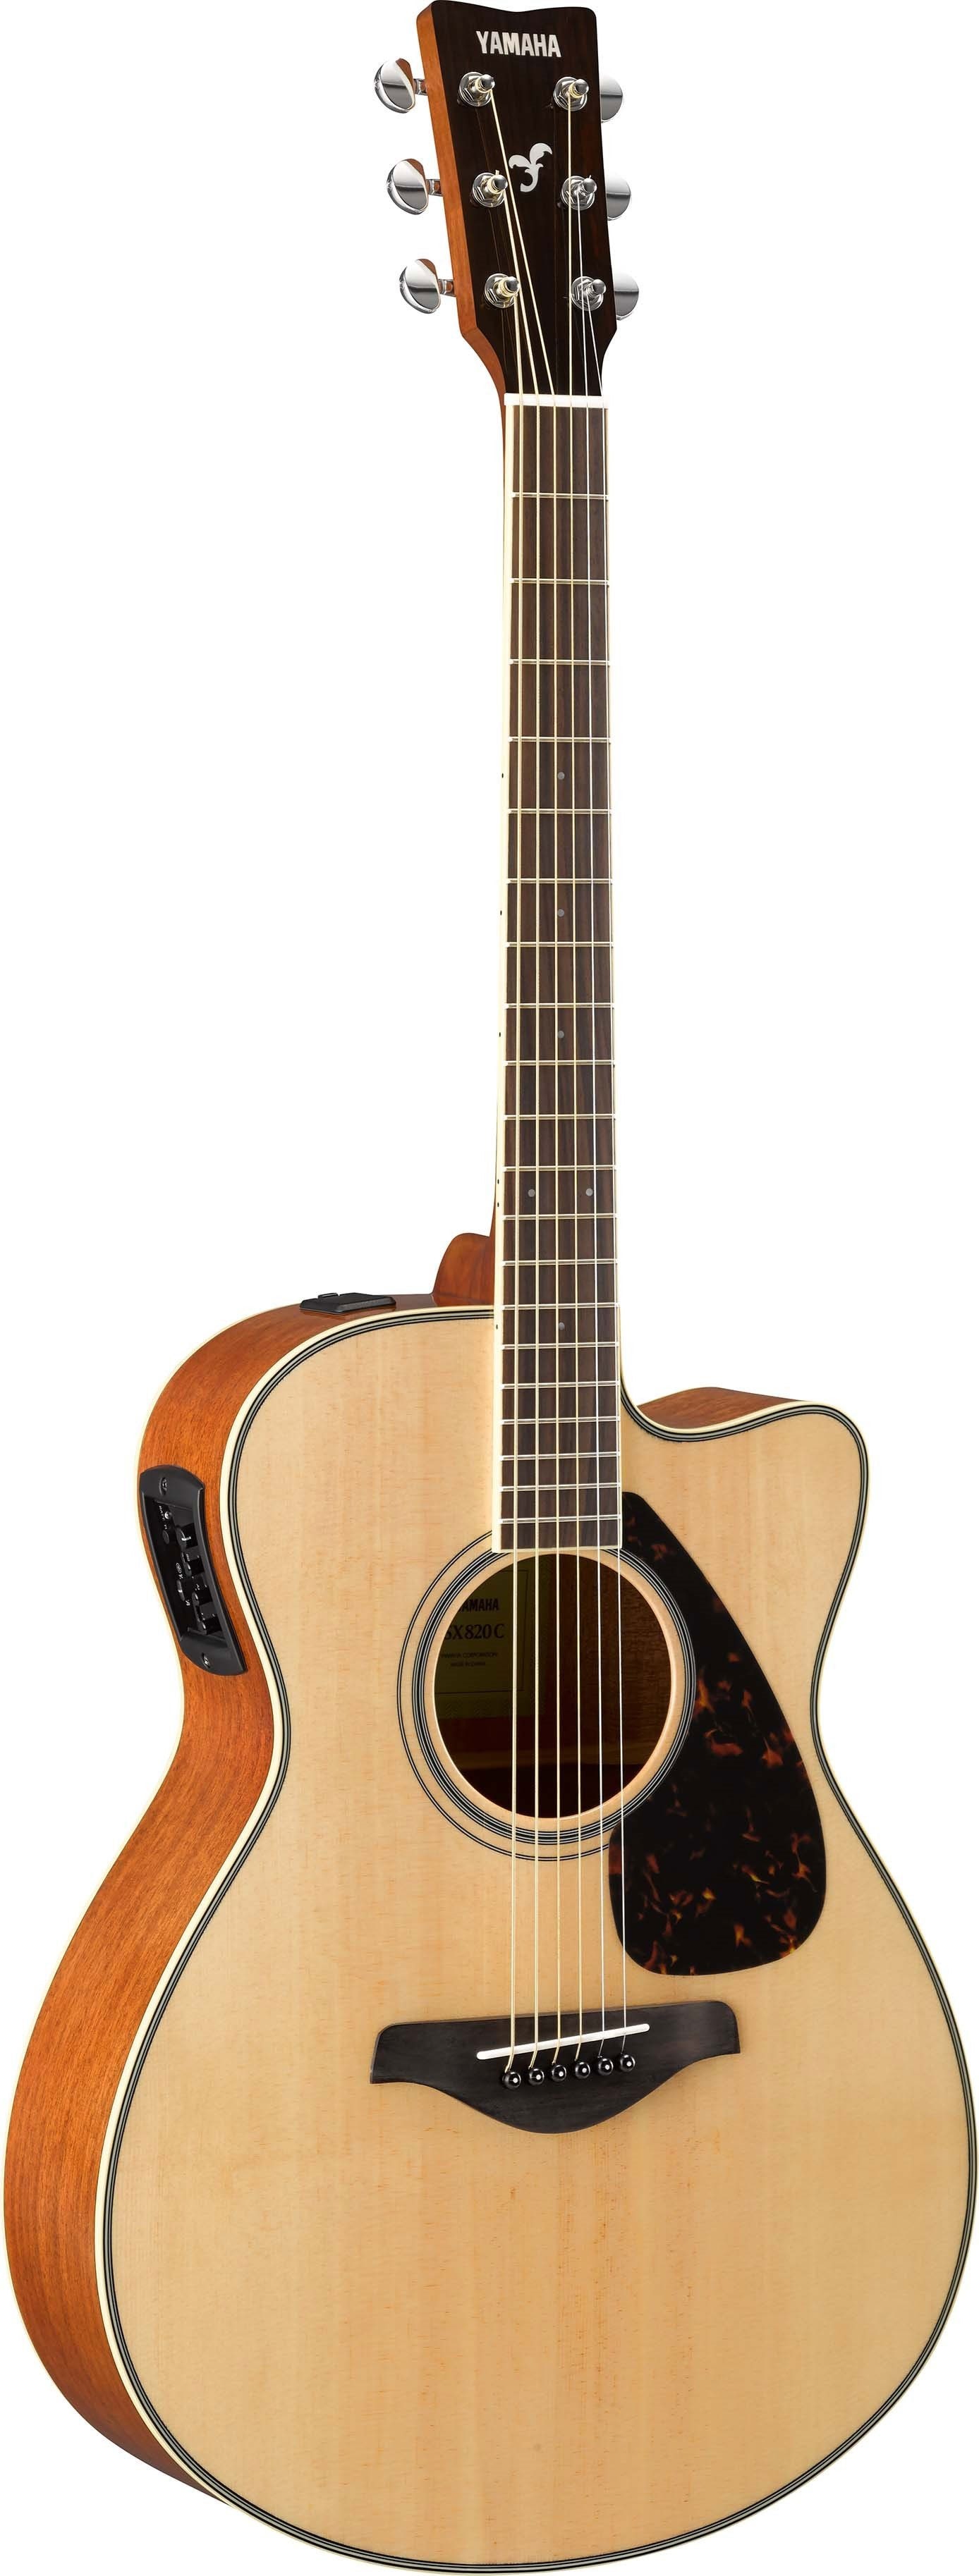 FG / FGX Series - Overview - FG Series - Acoustic Guitars - Guitars